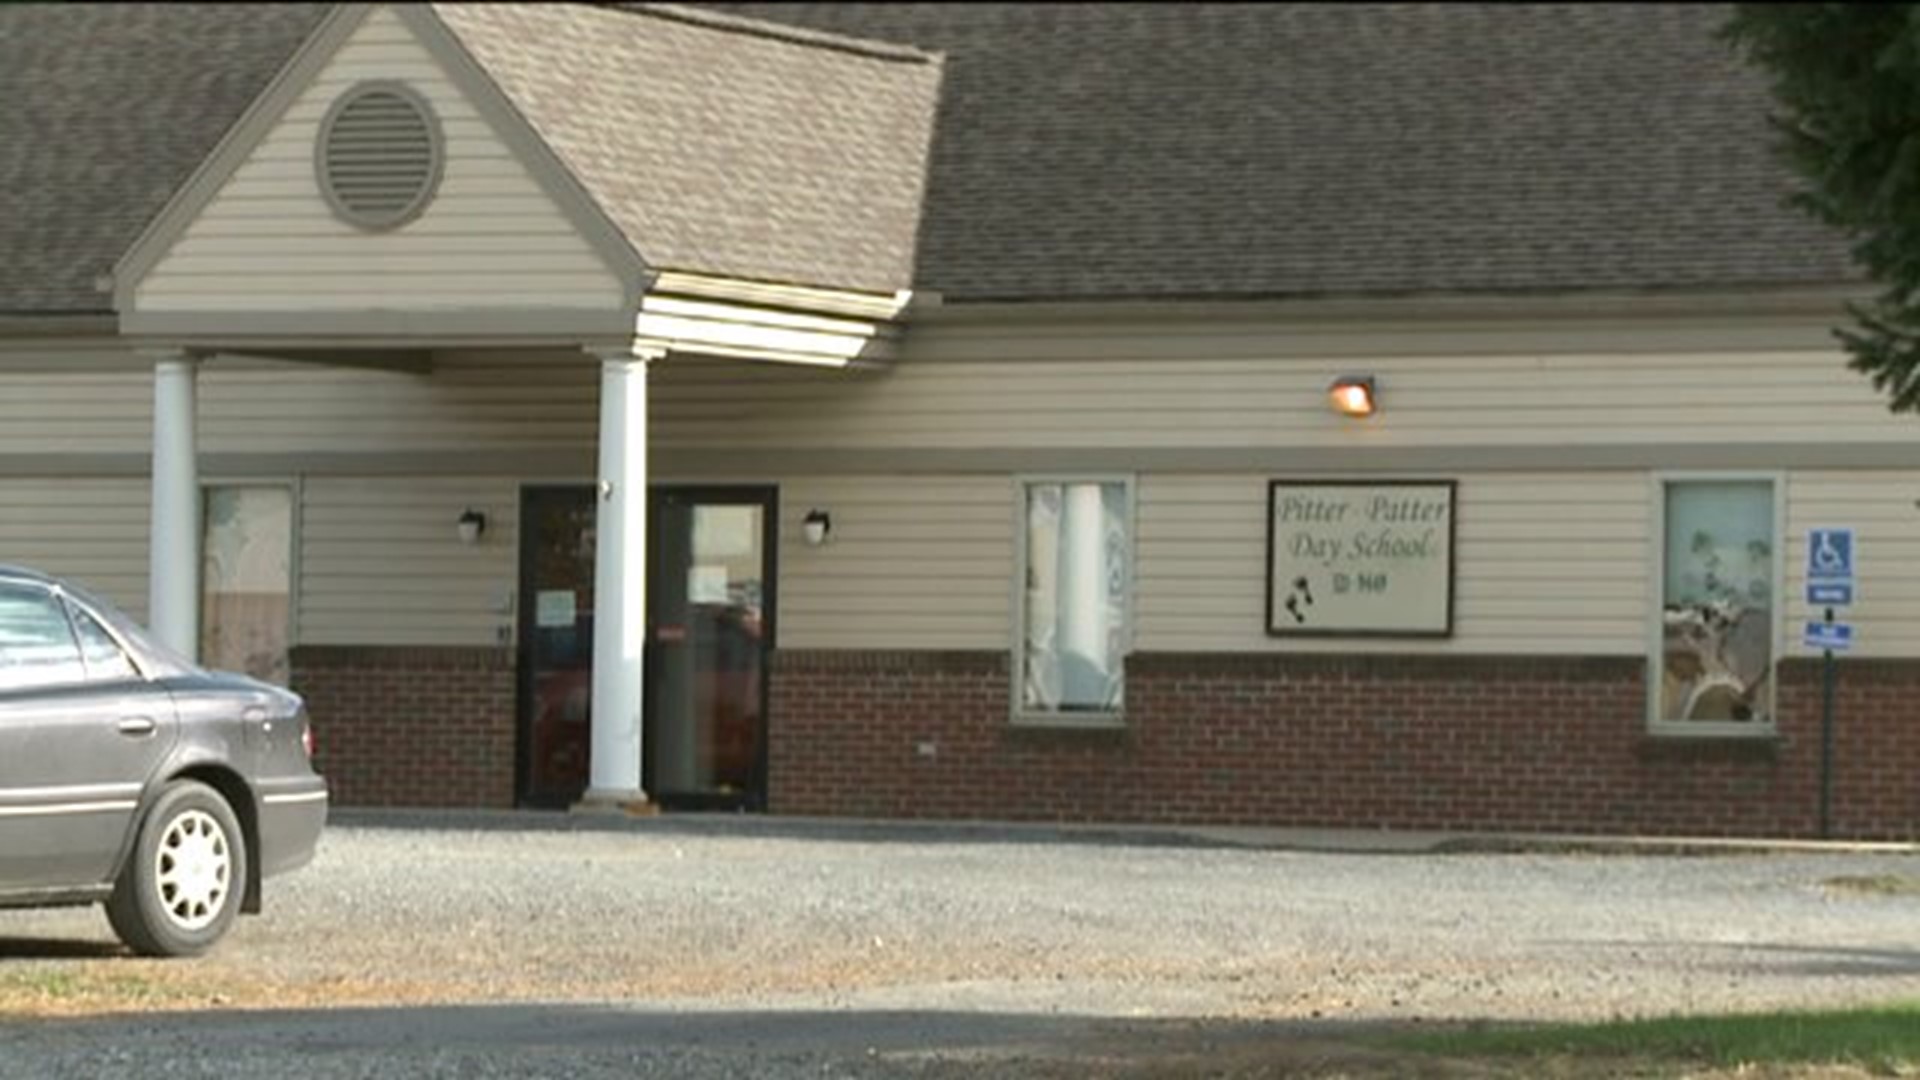 UPDATE: Pitter Patter to Close Two of Four Day Care Facilities